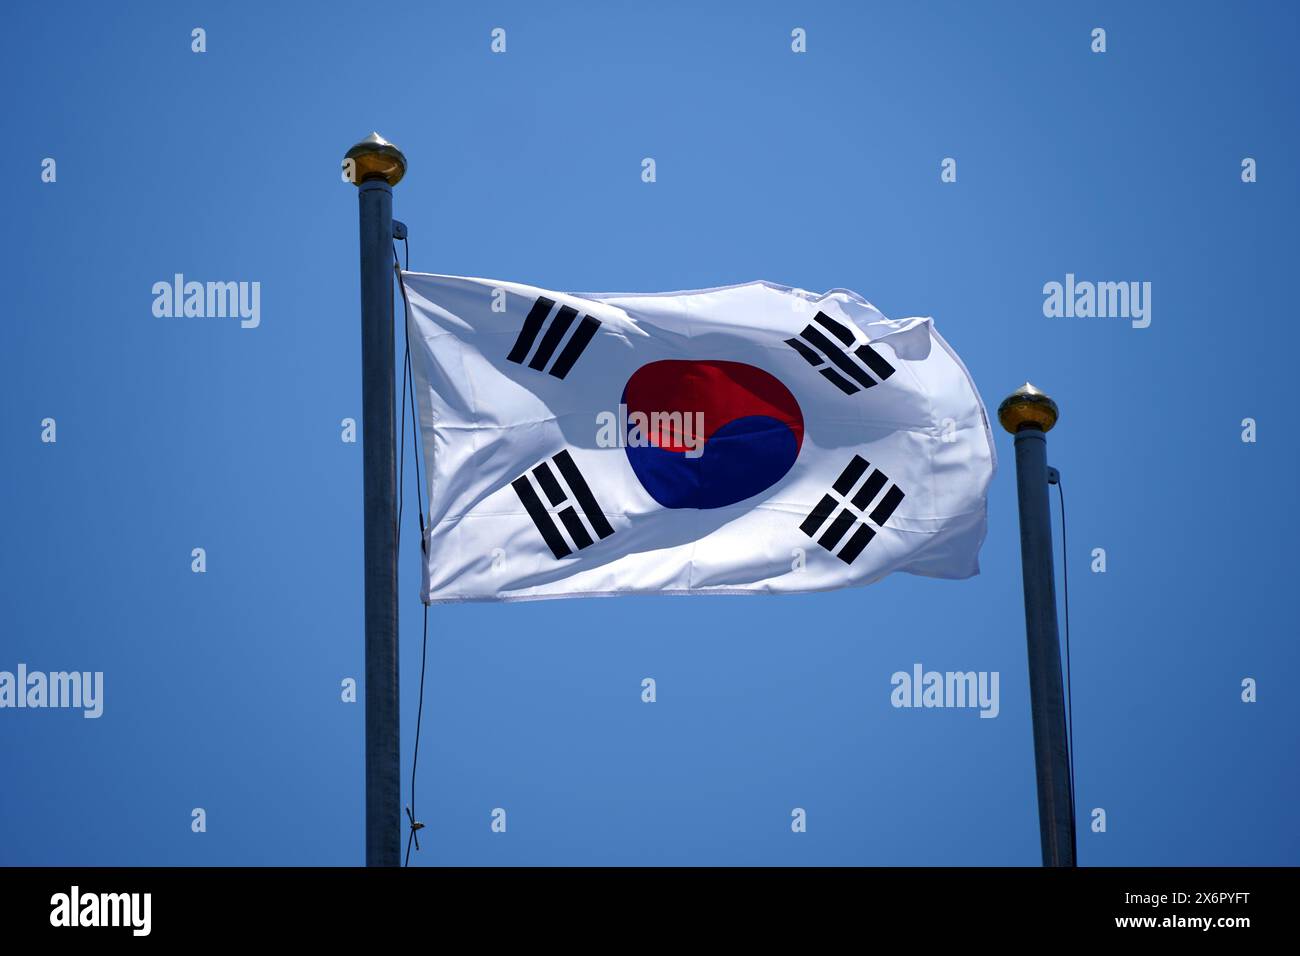 Flag of South Korea waving in the wind against a blue sky. Stock Photo